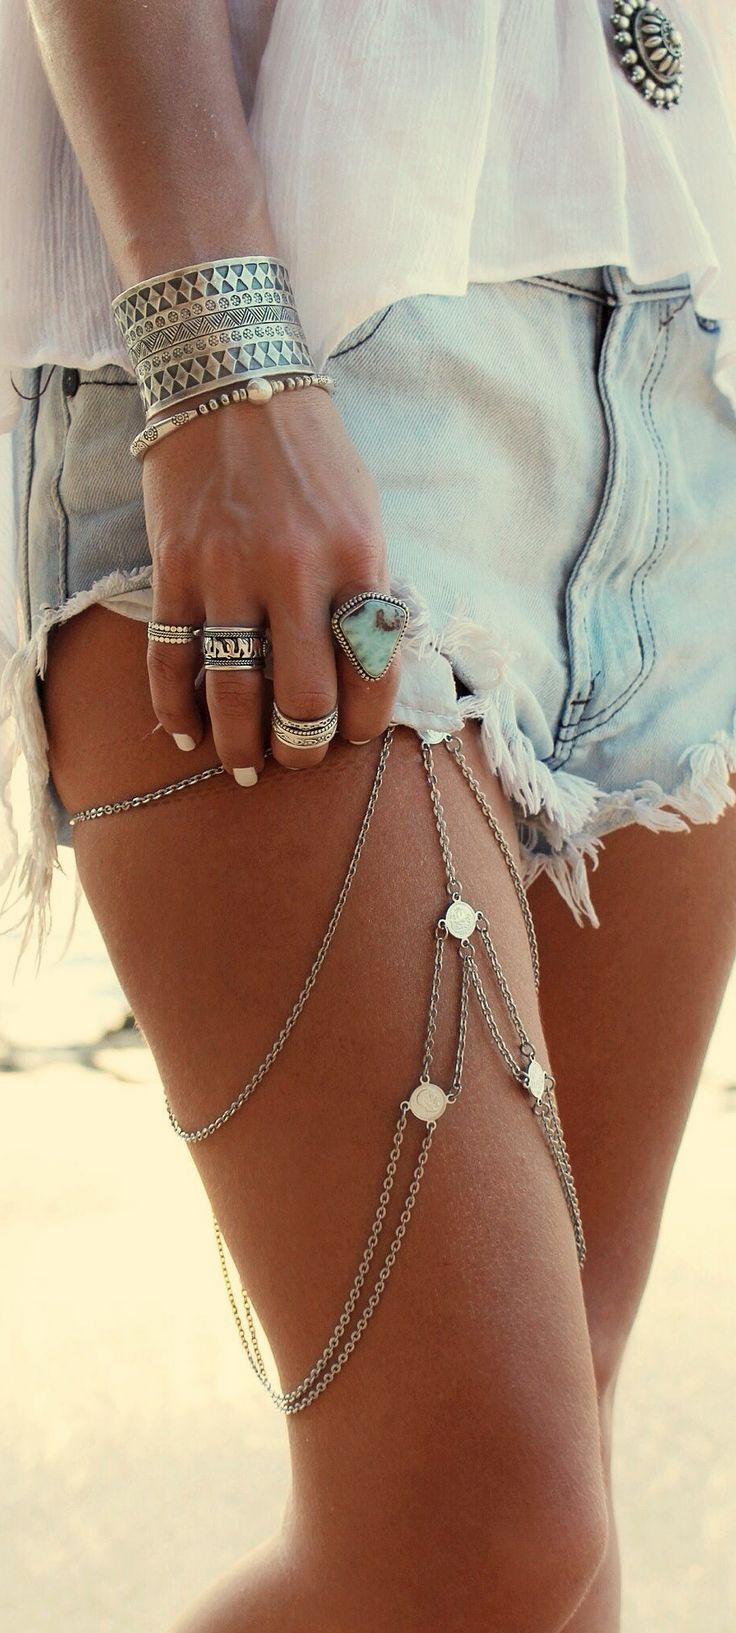 Body Jewelry Coachella
 Love all the silver ∙∙≪FOLLOW to see more boho style